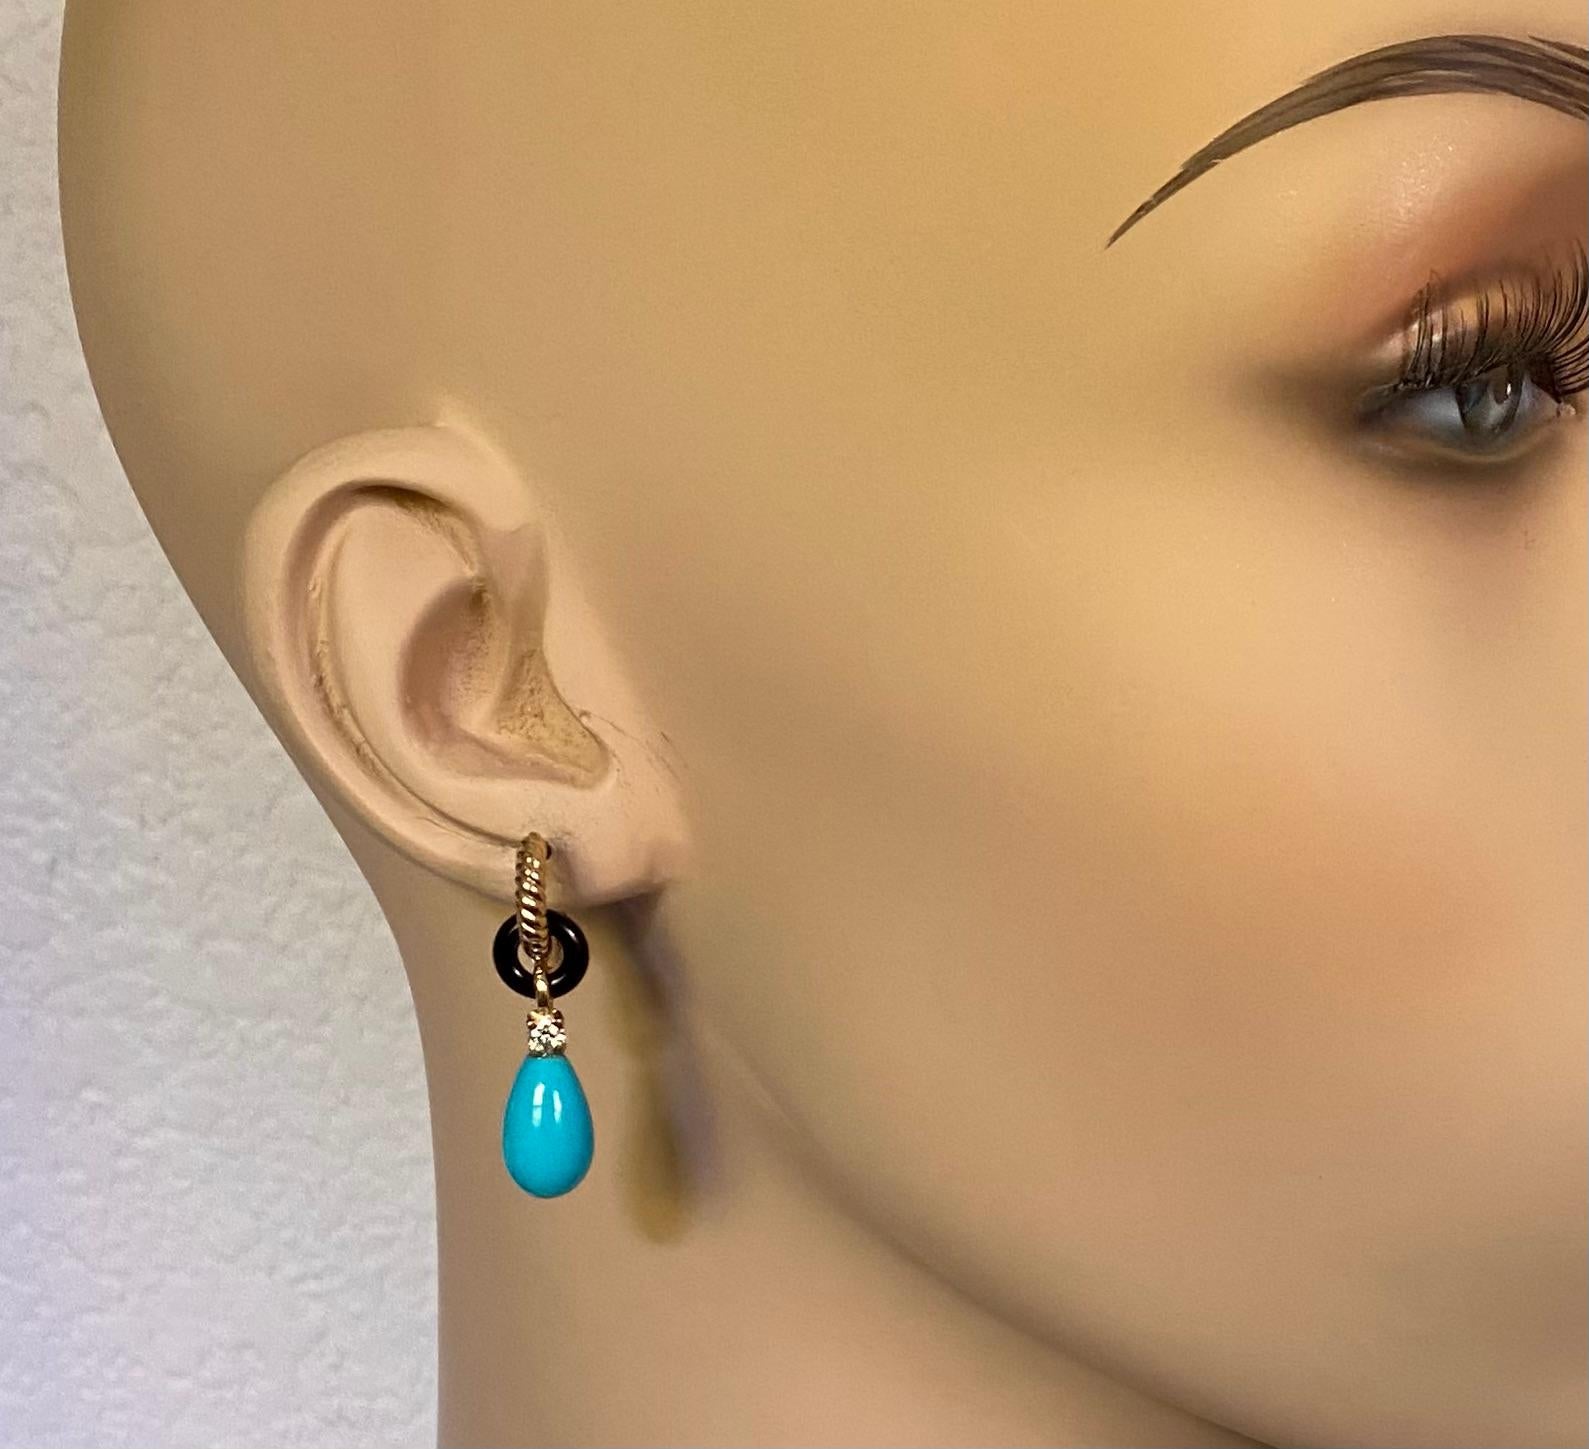 Sleeping Beauty turquoise drops are featured in these dainty dangle earrings.  The turquoise is from the famous Sleeping Beauty Mine in Arizona.  The mine is now permanently closed making this material difficult to find.  The drops are perfectly